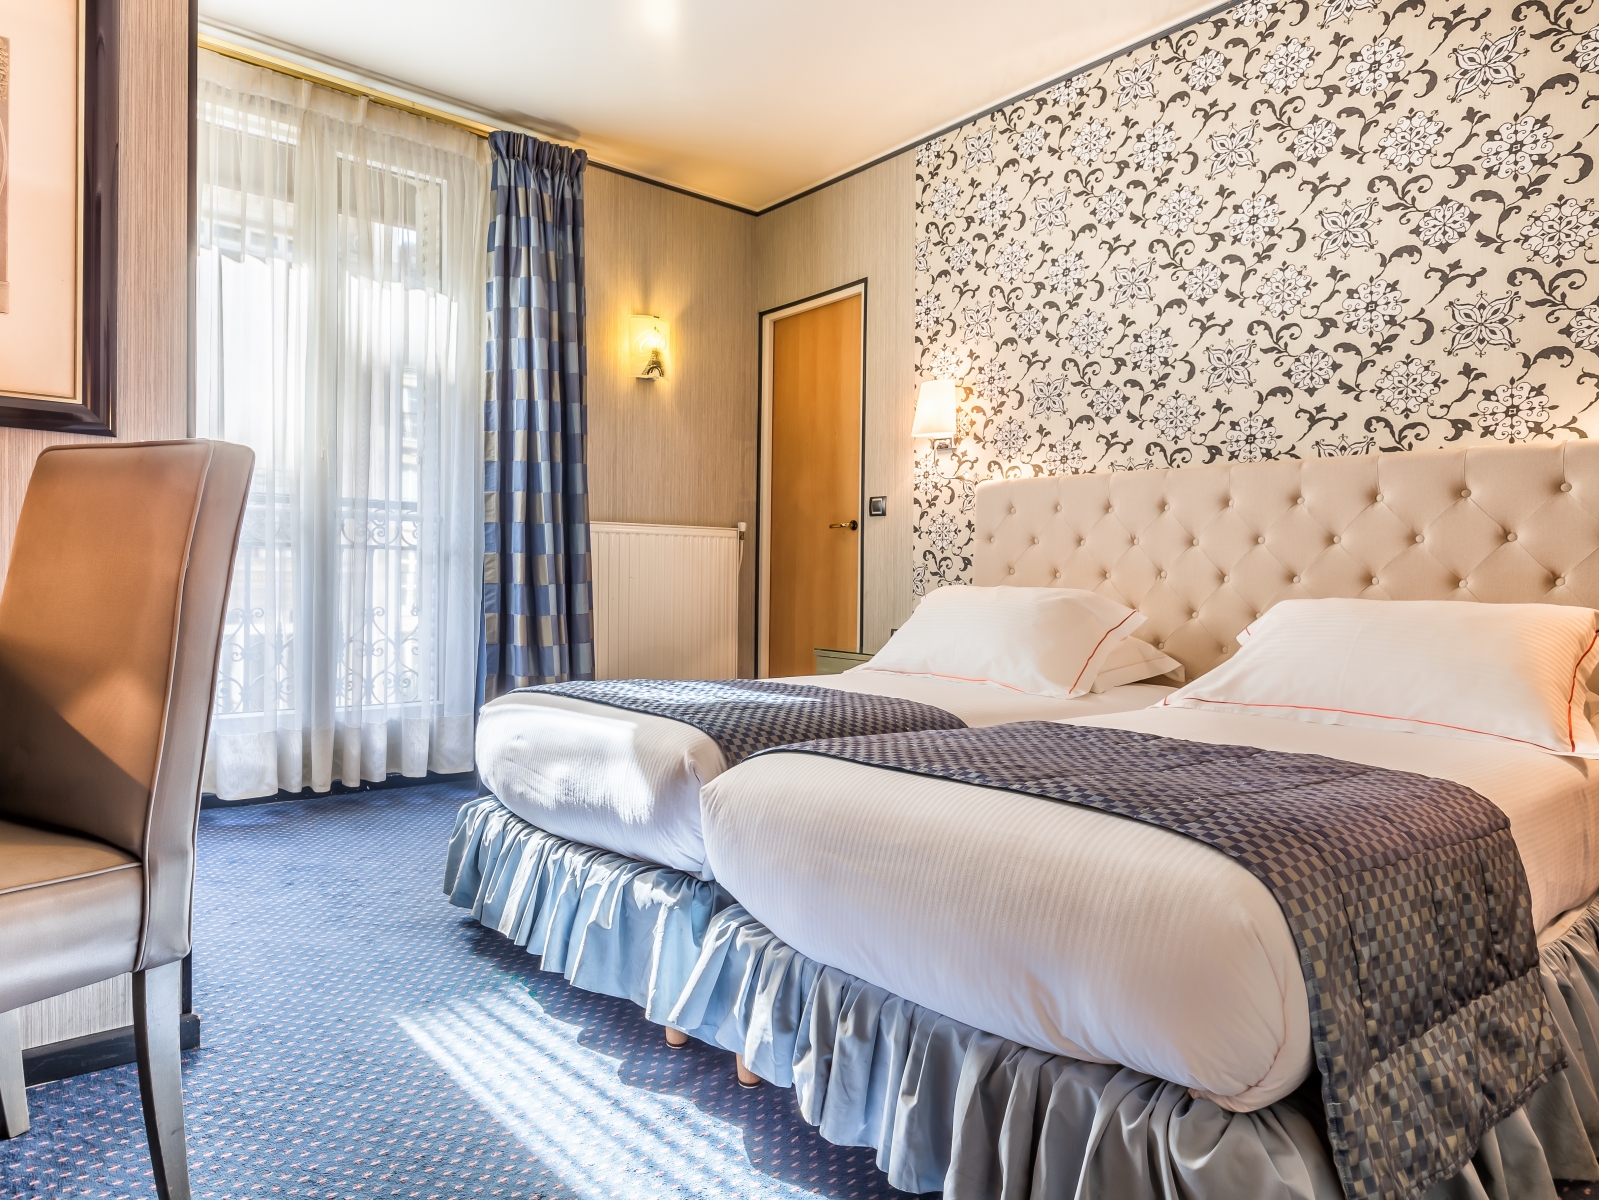 Hotel Le Regence <br/>185.00 ew <br/> <a href='http://vakantieoplossing.nl/outpage/?id=e7403dd479ec6b19257fac20e624c406' target='_blank'>View Details</a>